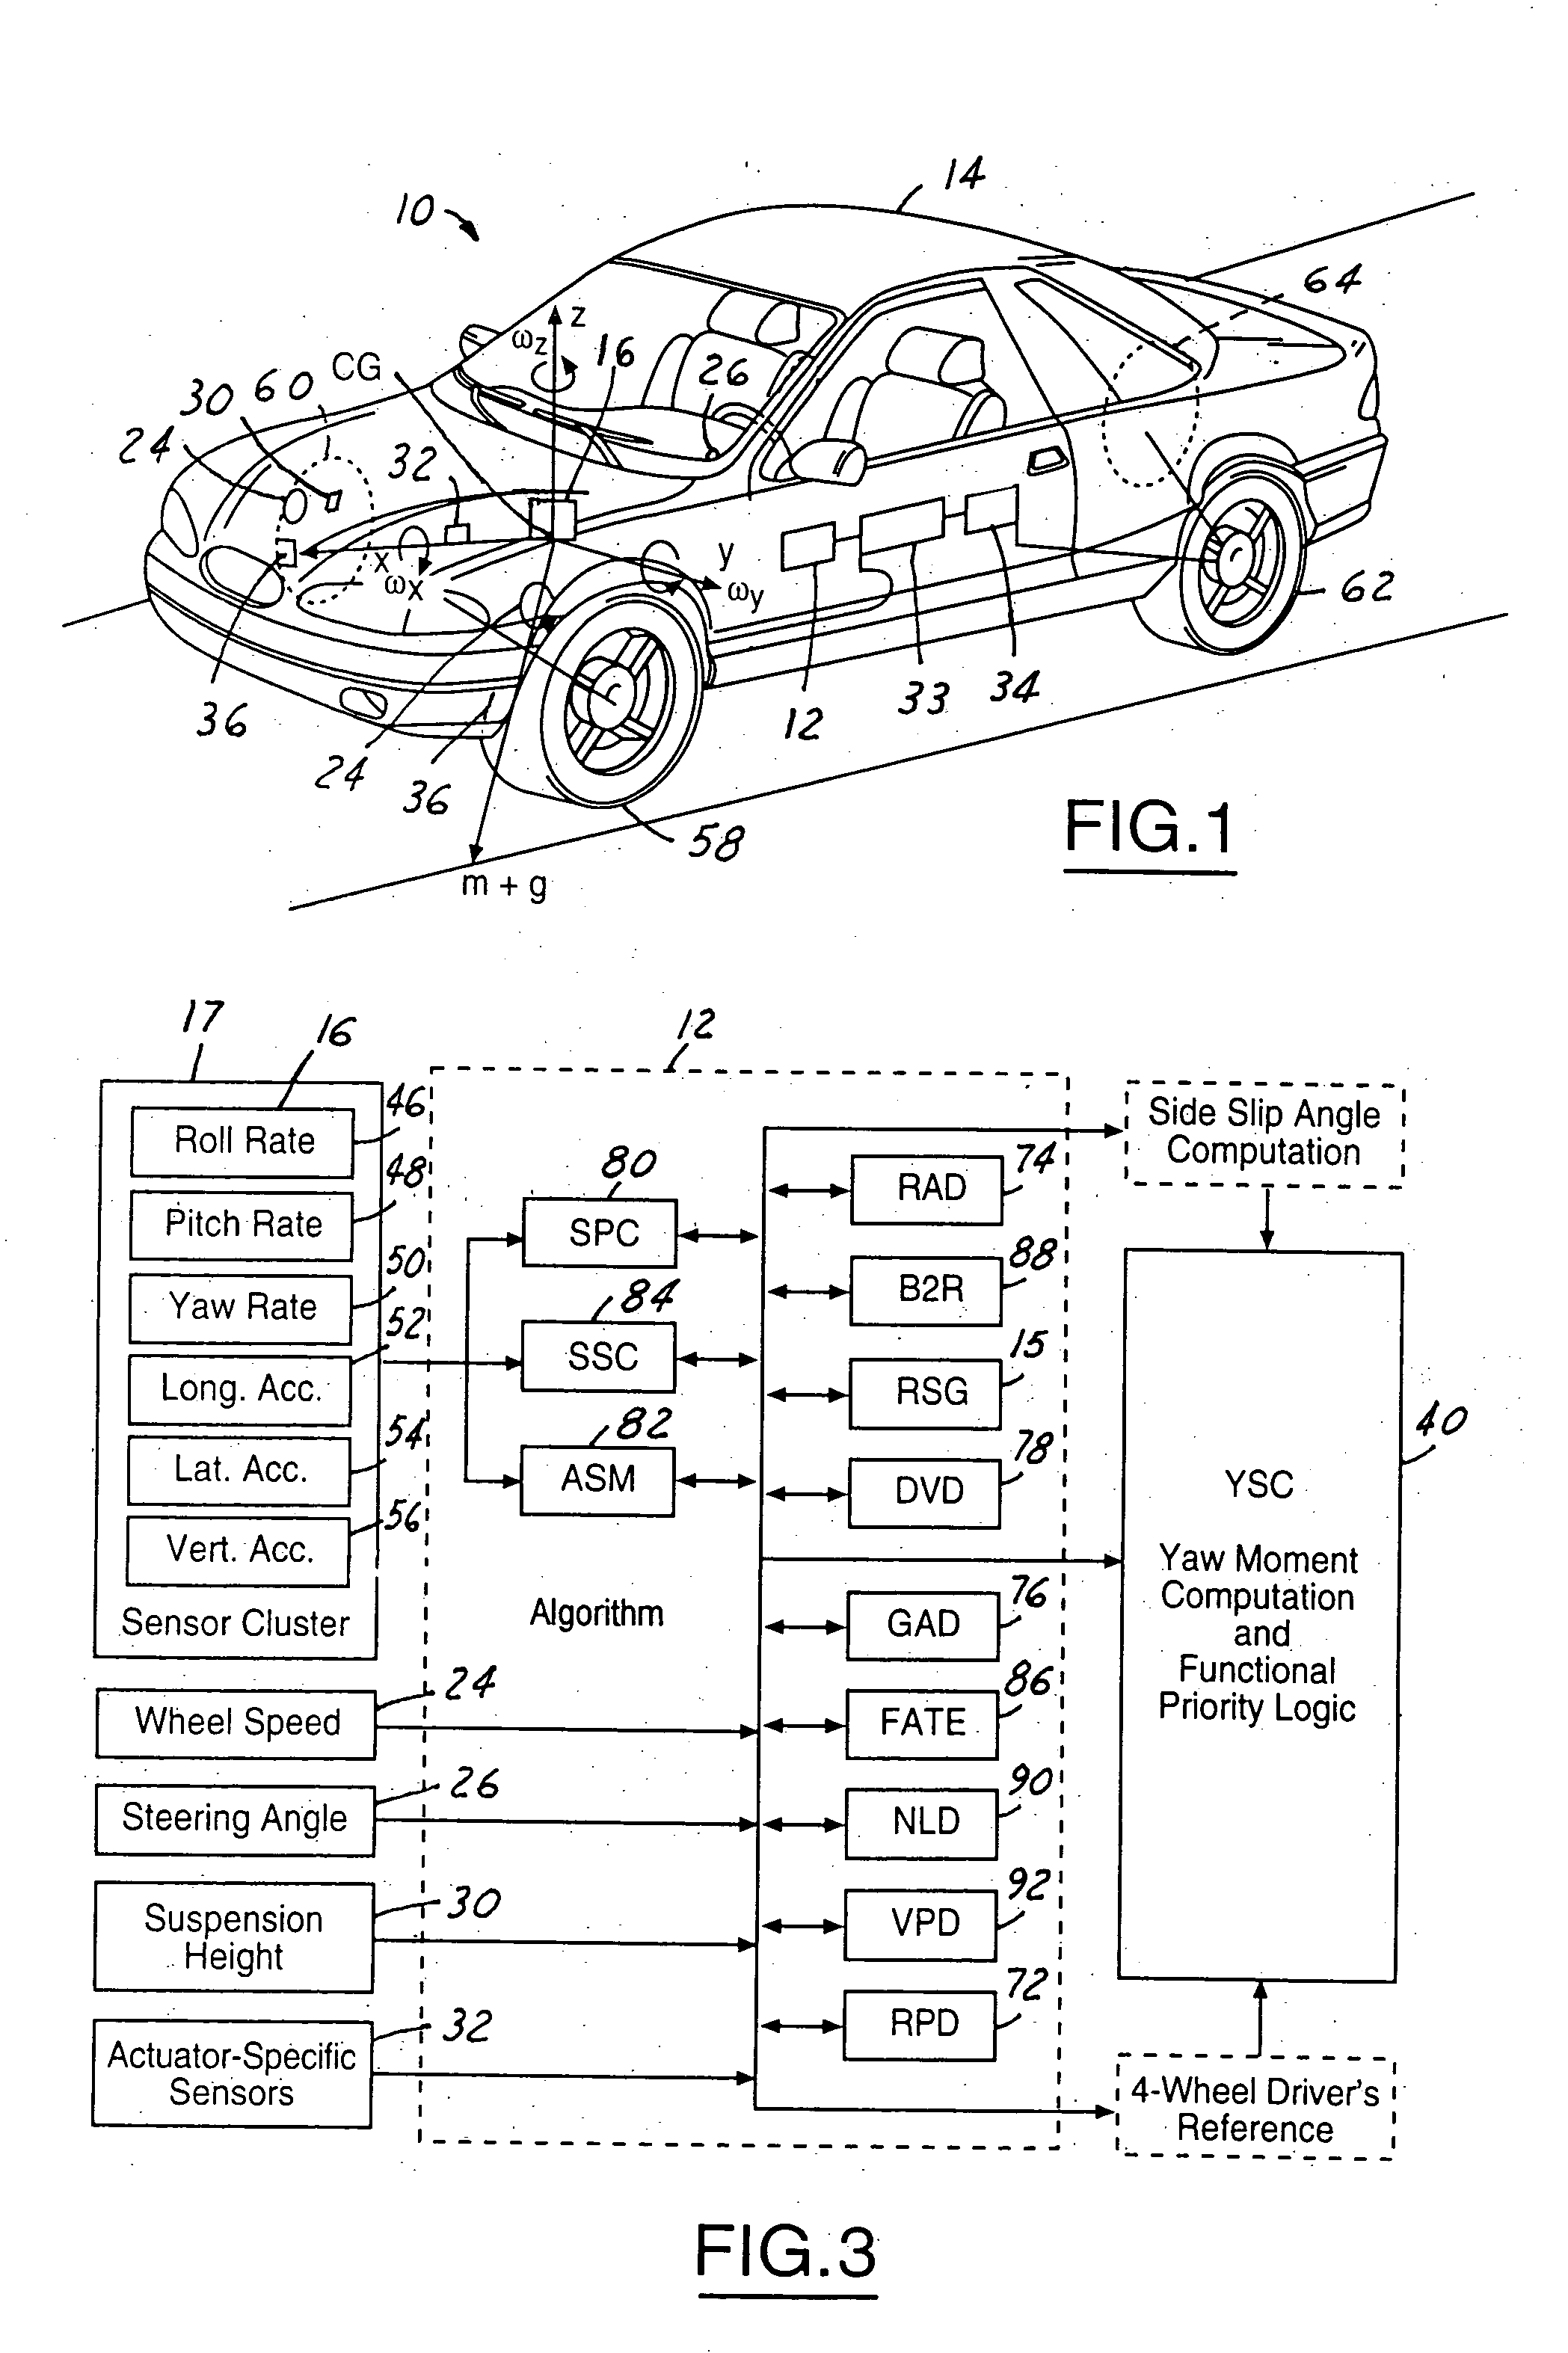 Reference signal generator for an integrated sensing system